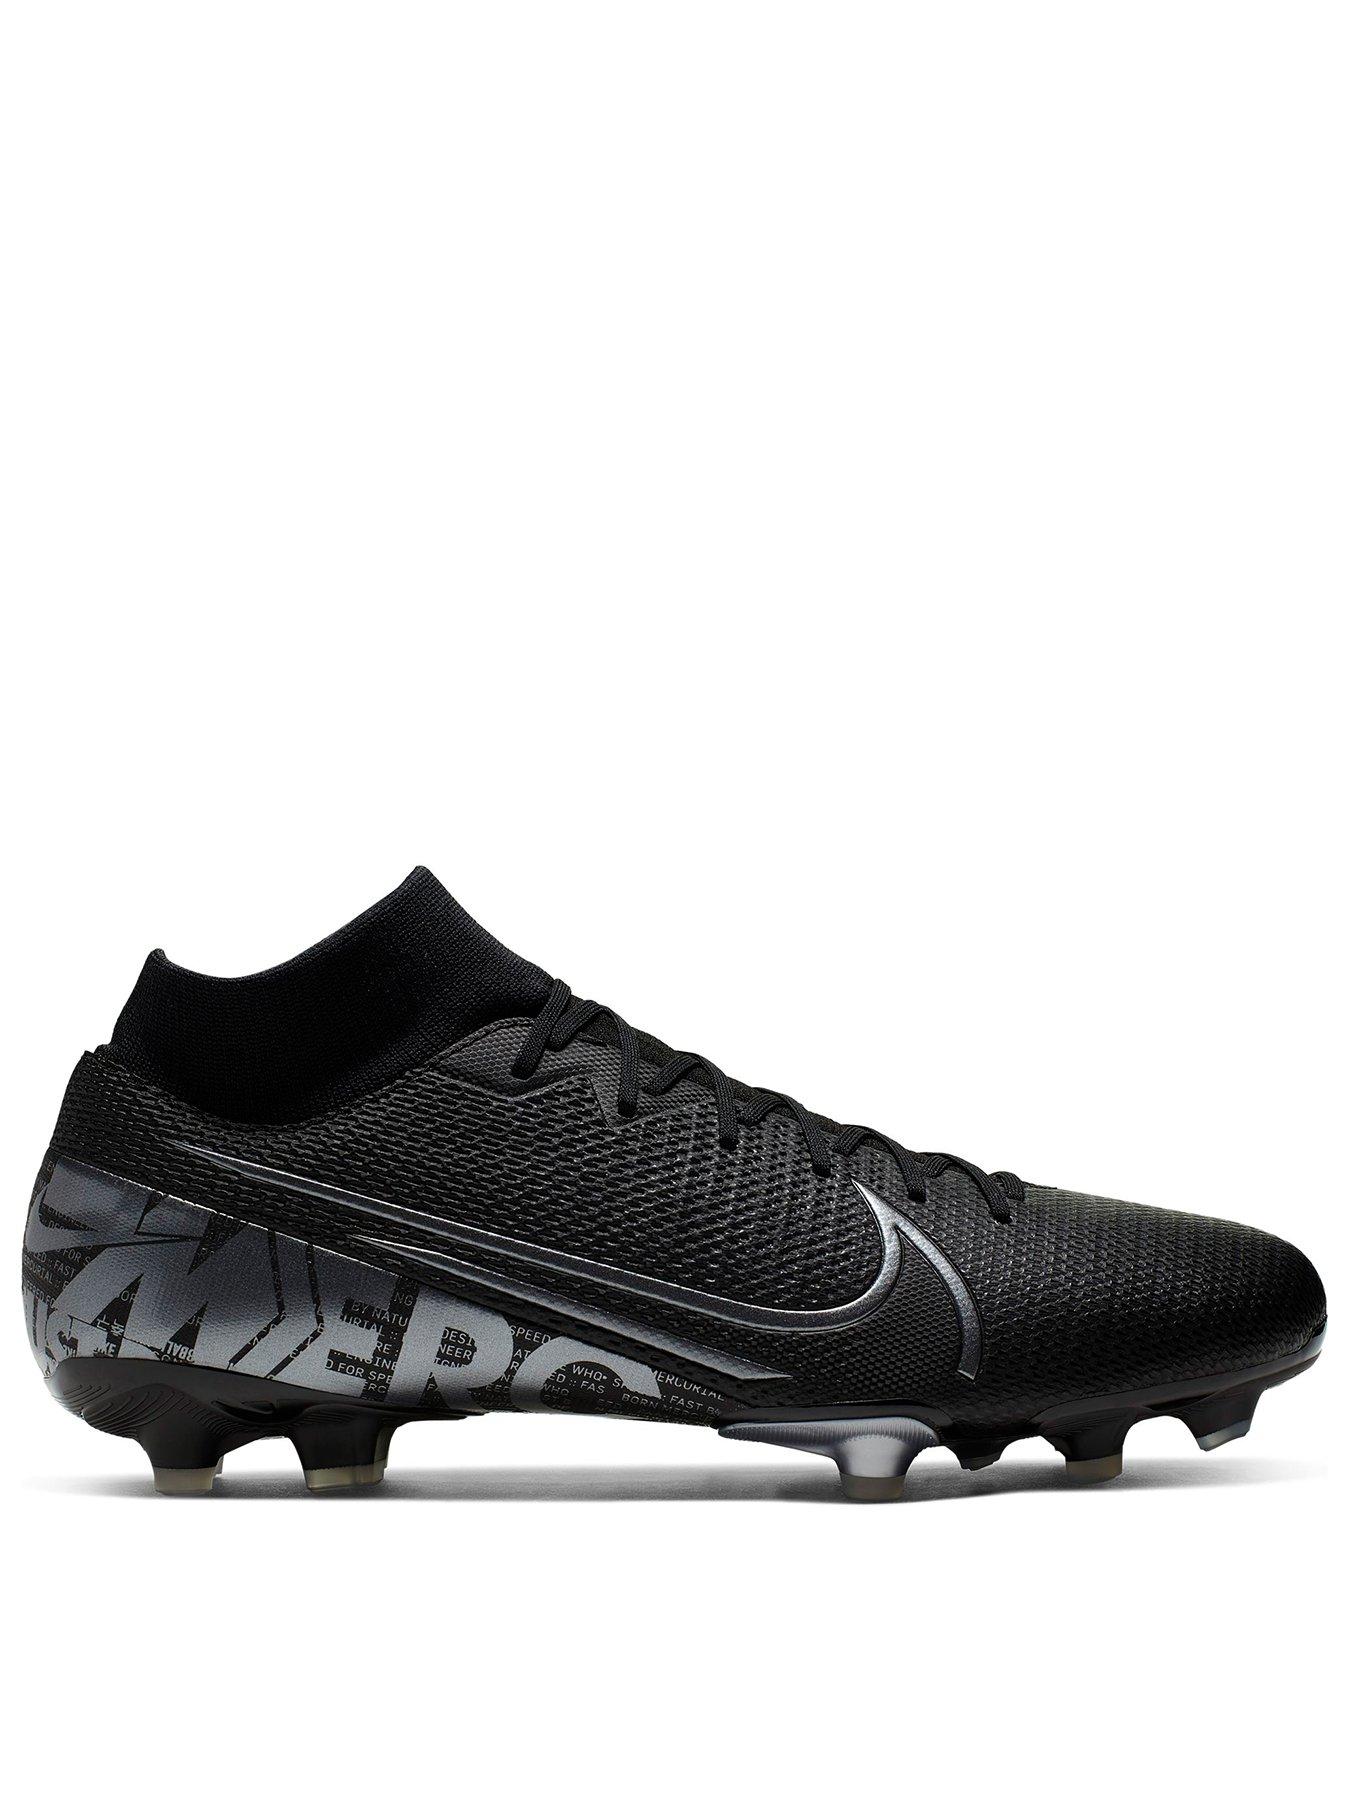 Nike Mercurial Superfly 6 Academy SG PRO Game Over Dark Grey